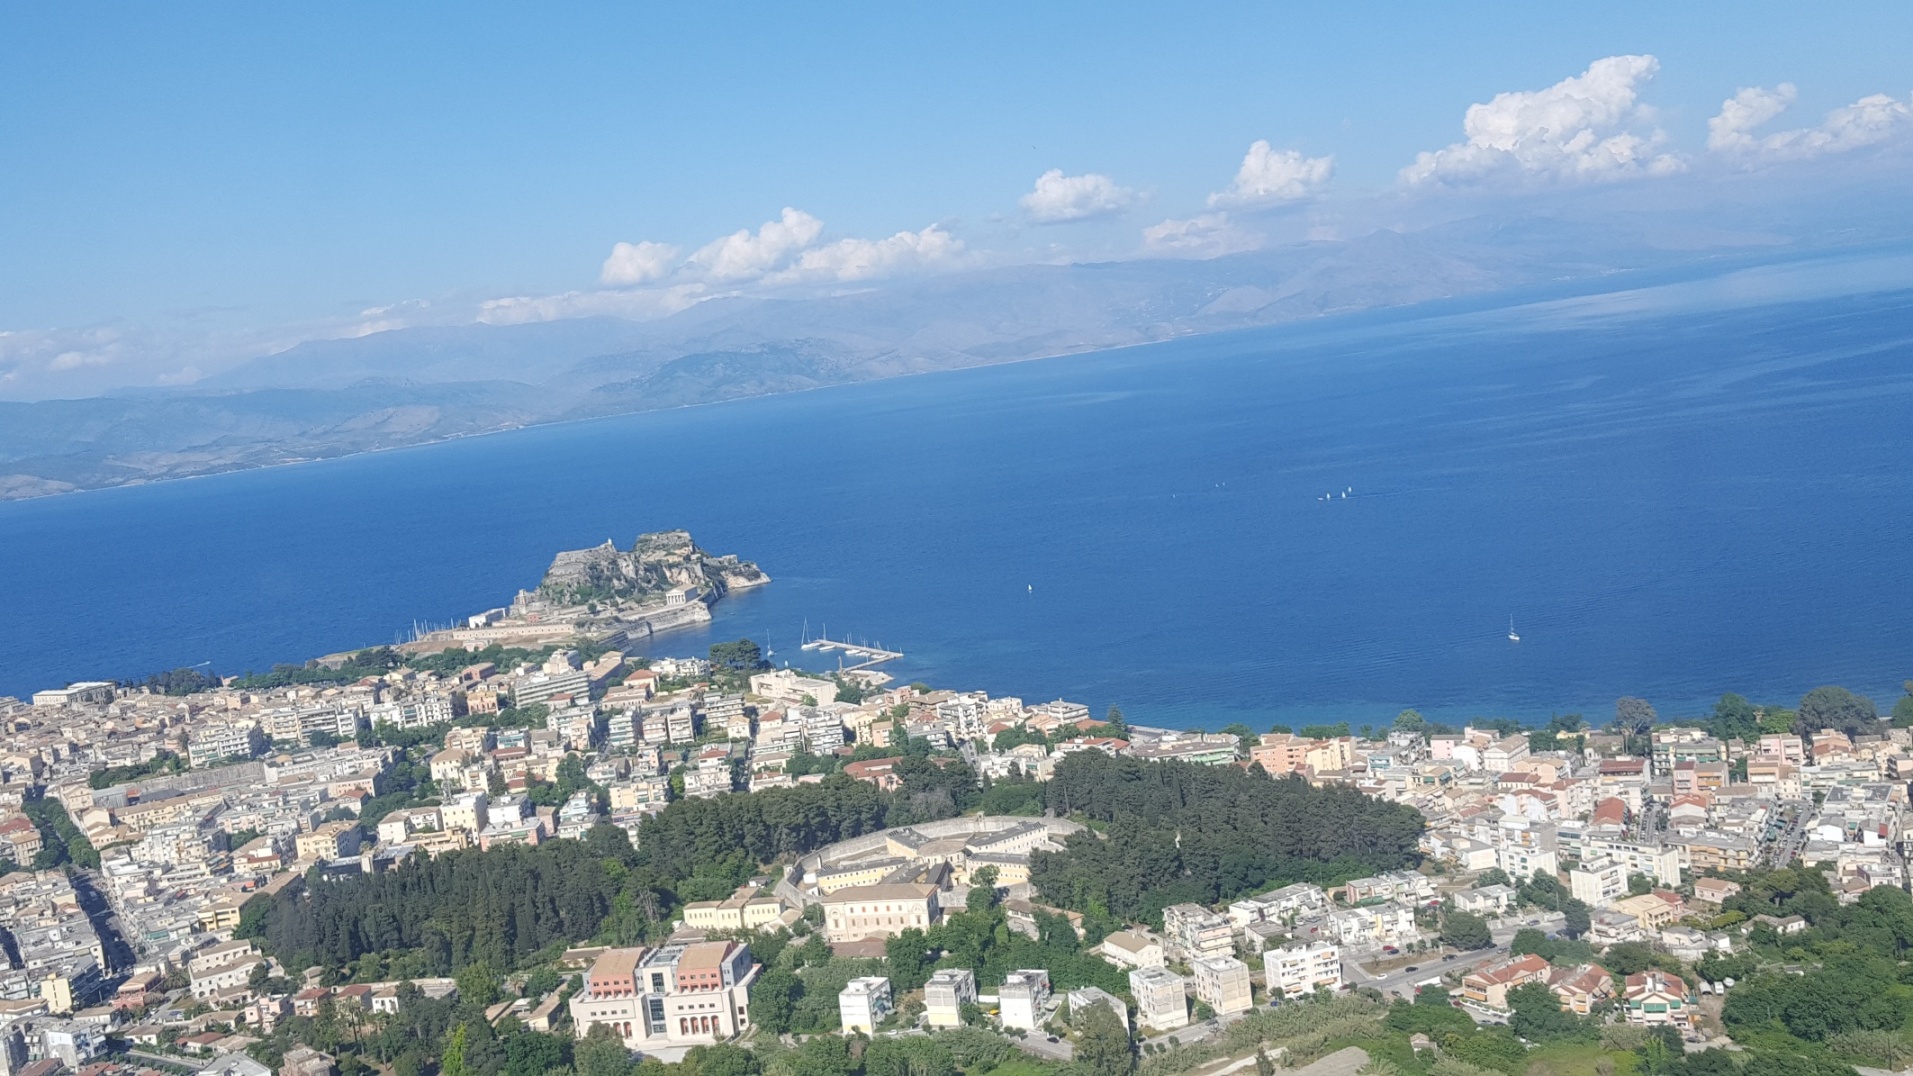 Corfu Town from the air